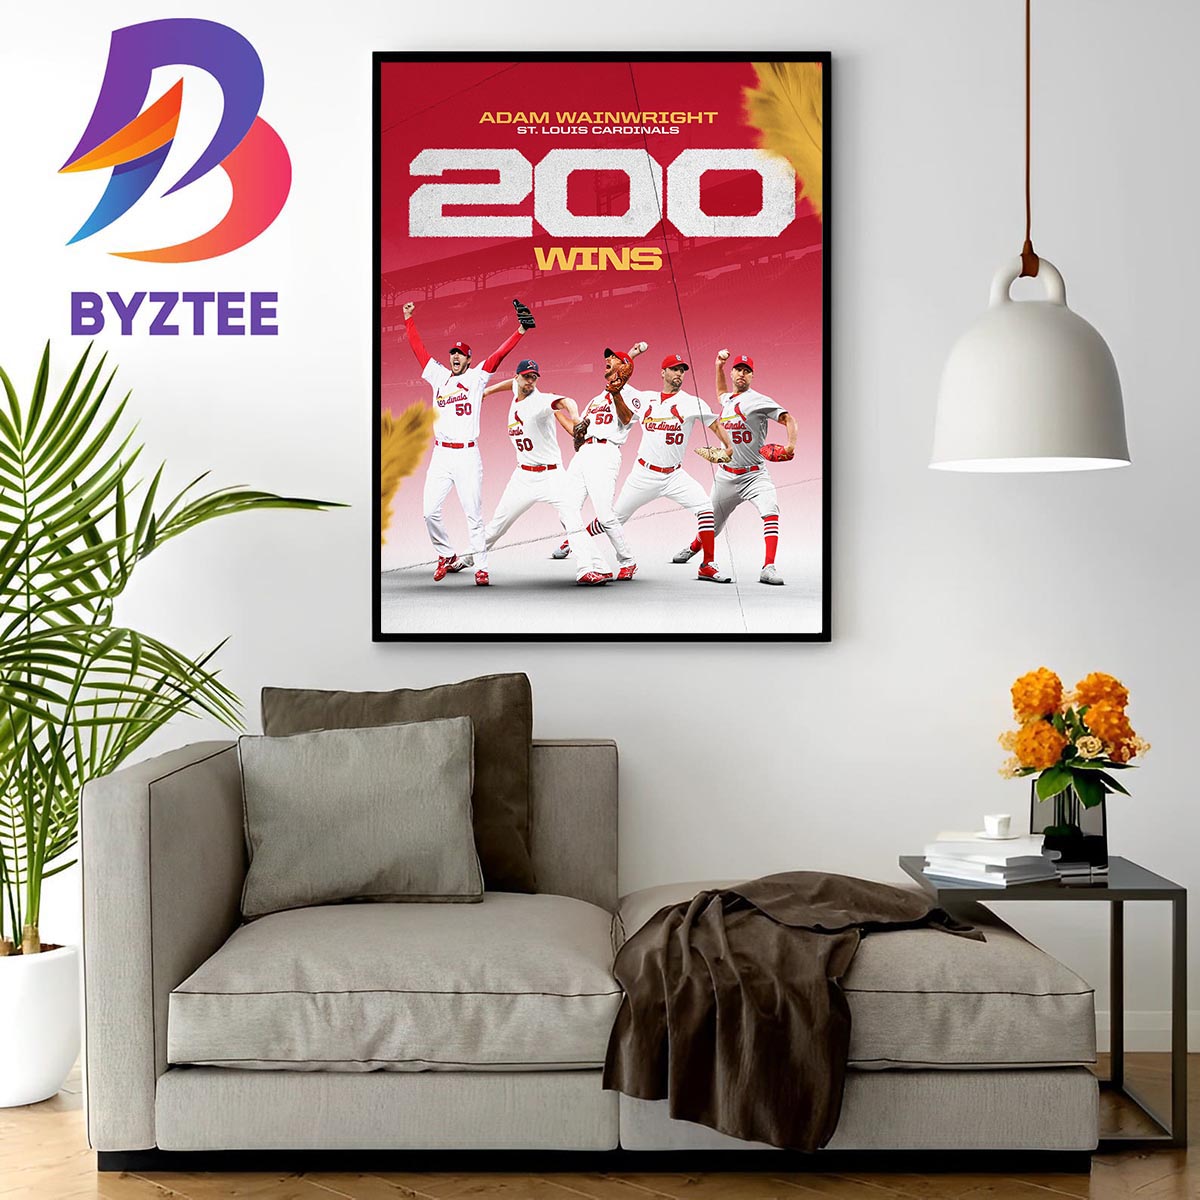 Welcome to the 200-win club Adam Wainwright St Louis Cardinals Poster  Canvas - Roostershirt